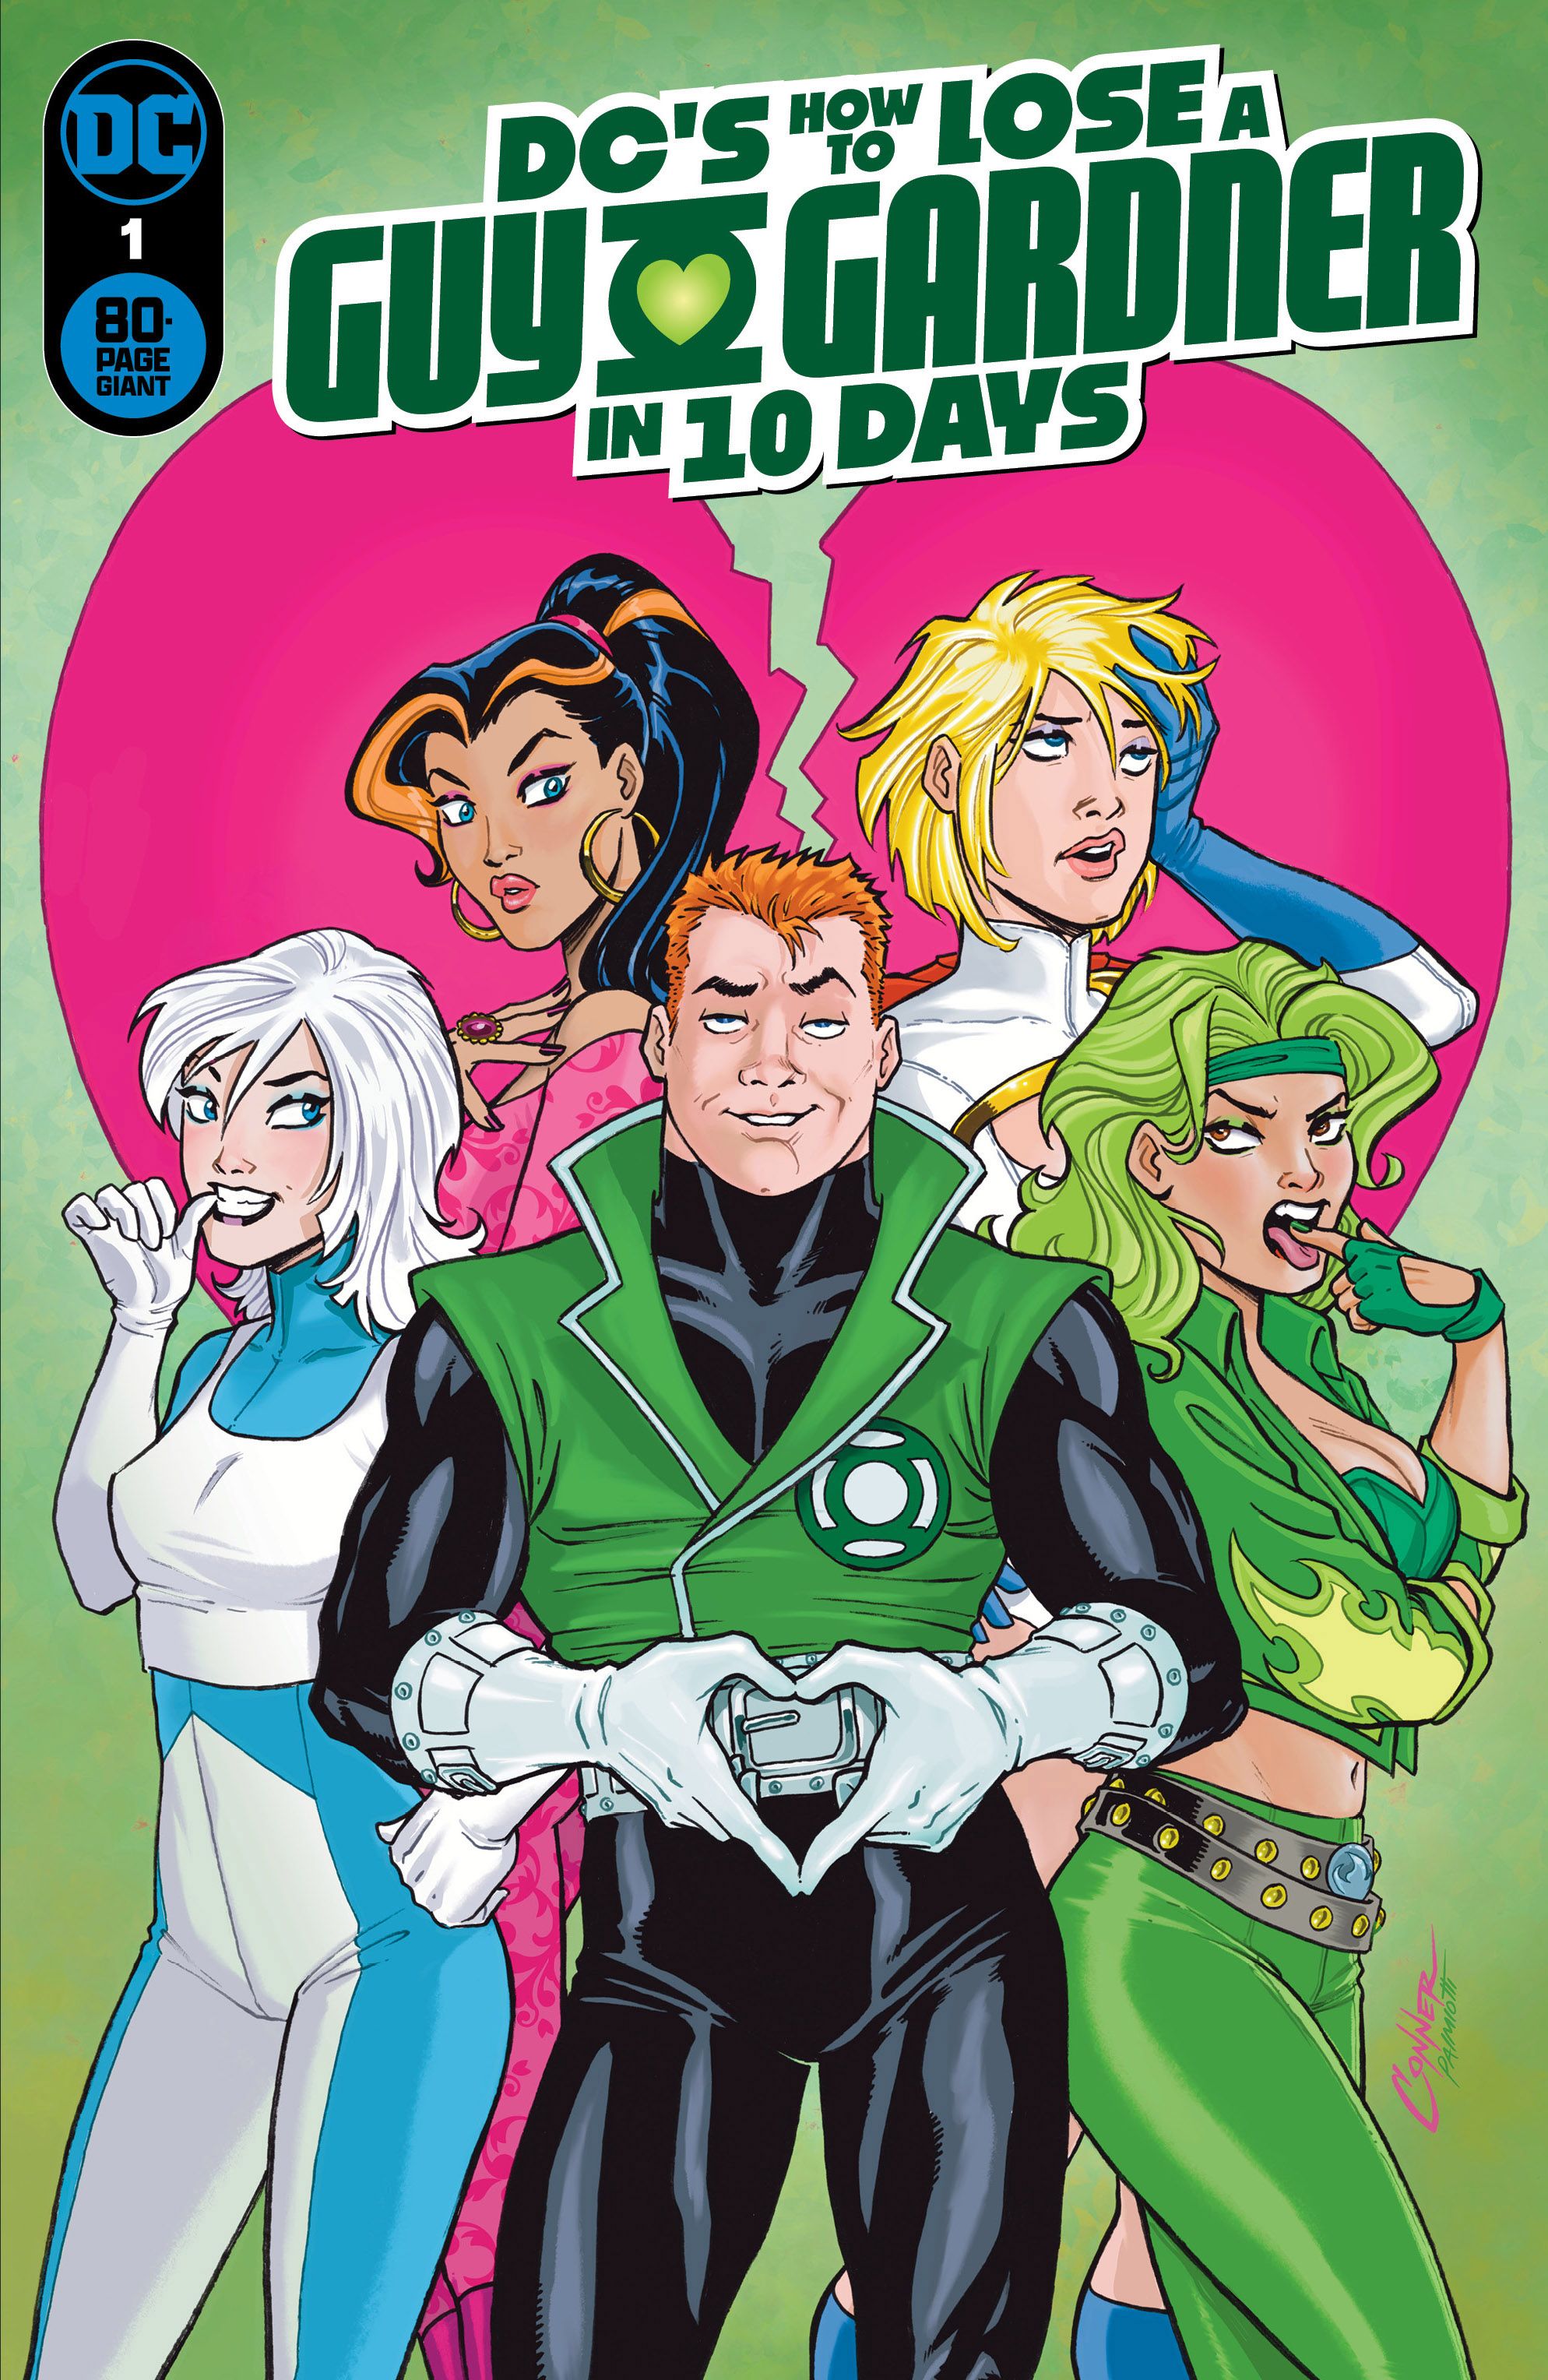 DC's How to Lose a Guy Gardner in 10 Days Comic